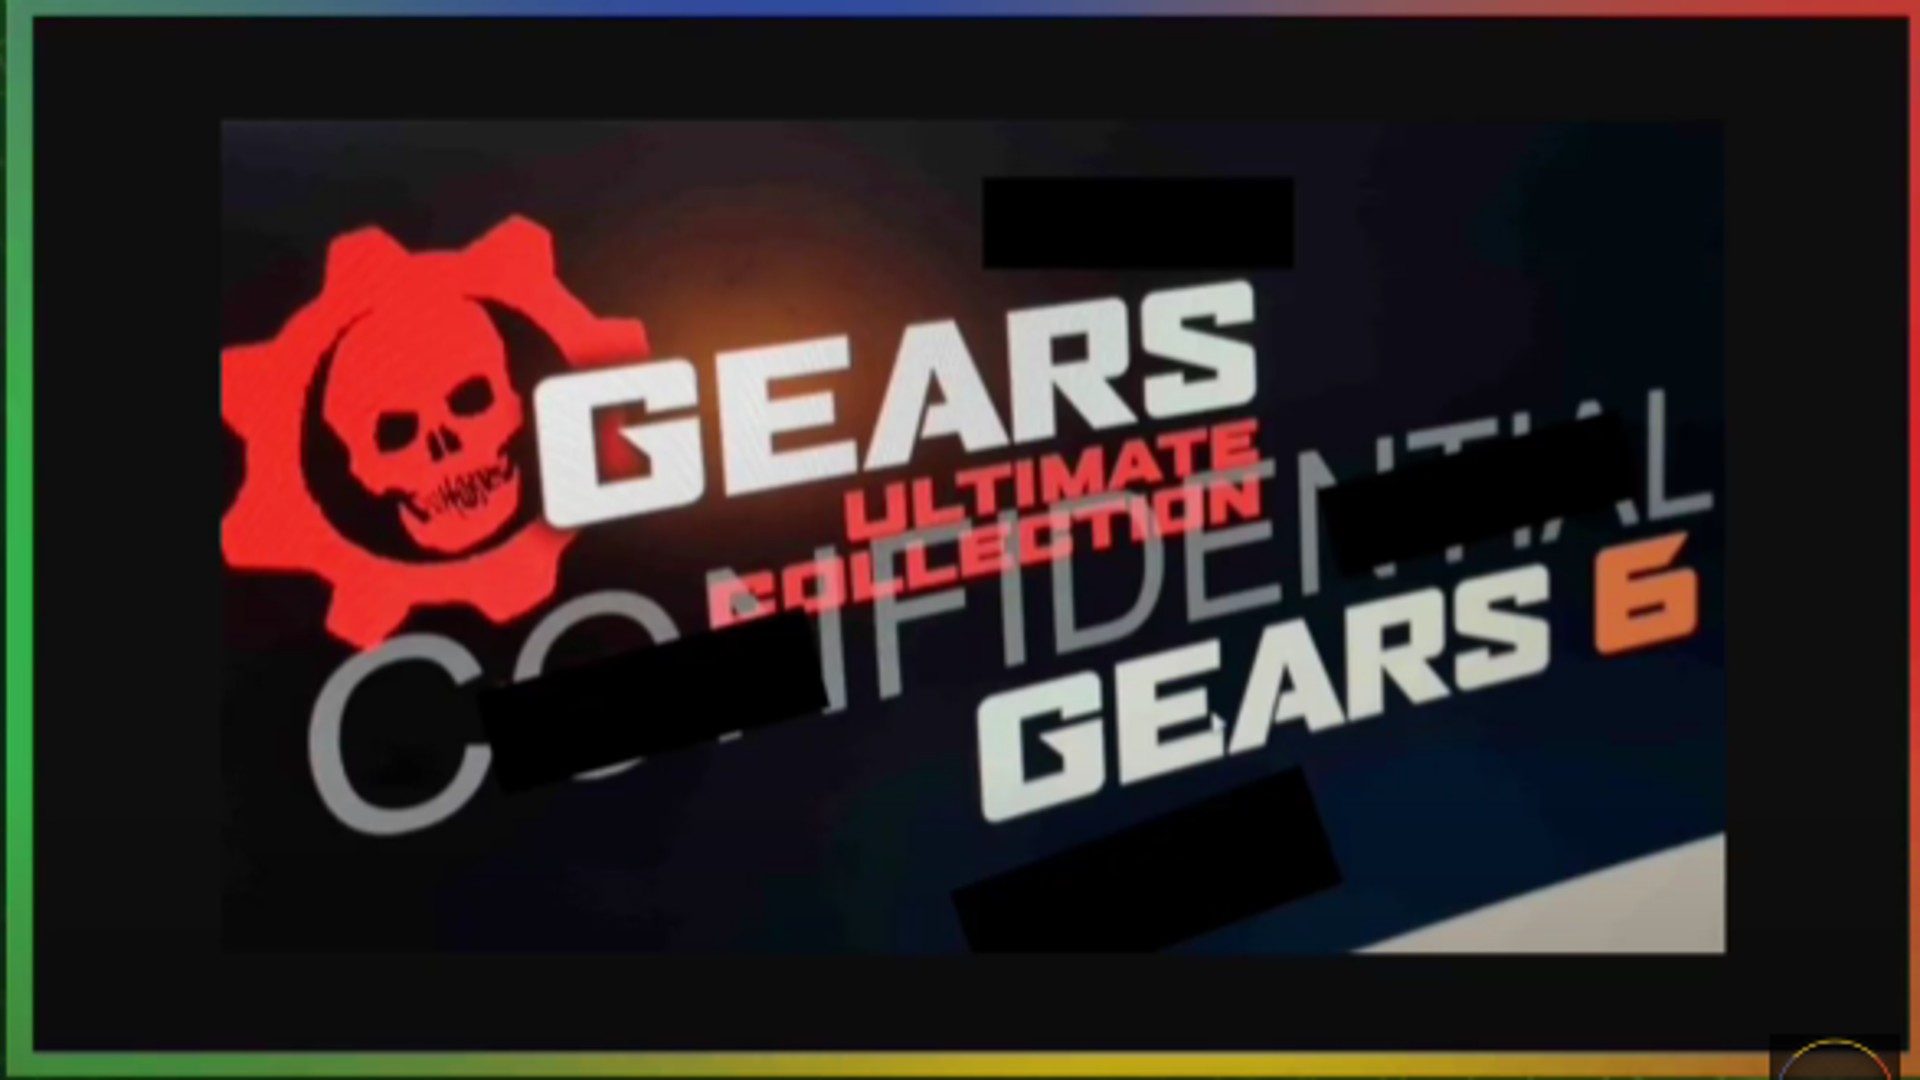 gears ultimate collection gears 6 leaked  Image of gears ultimate collection gears 6 leaked